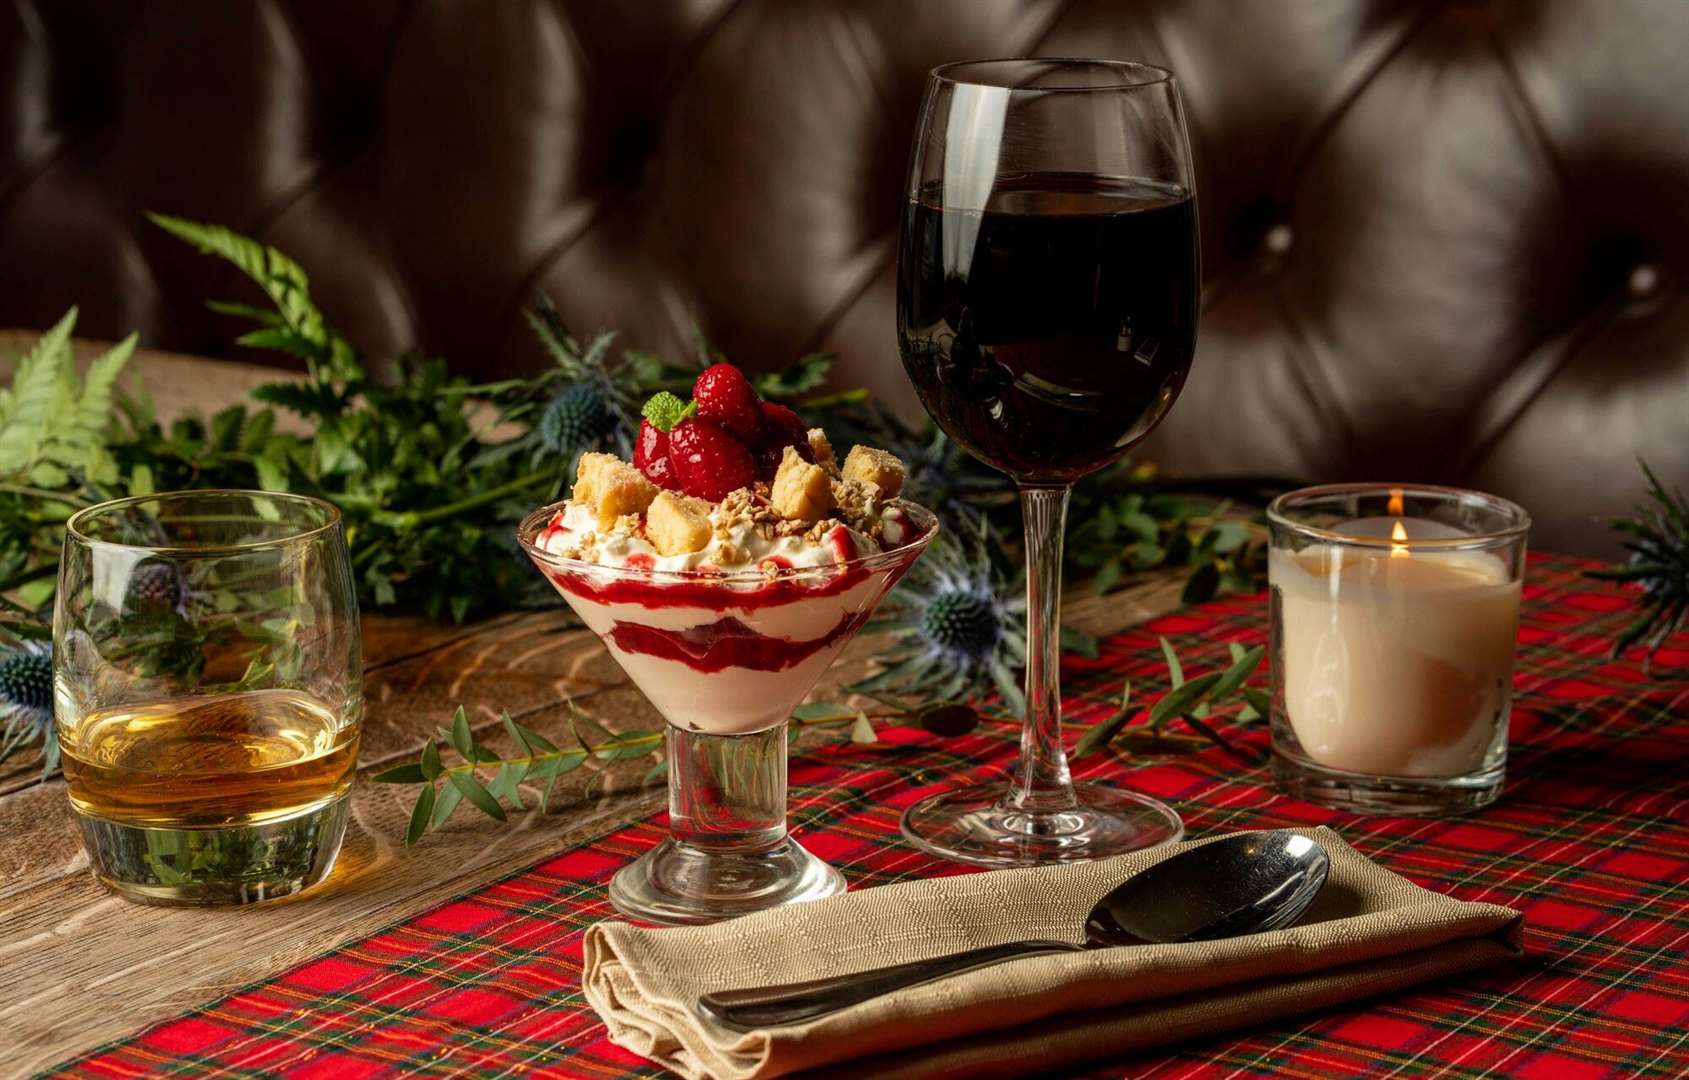 Cranachan is a traditional Scottish dessert made with cream, raspberries, oats and whisky. Picture: Shepherd Neame